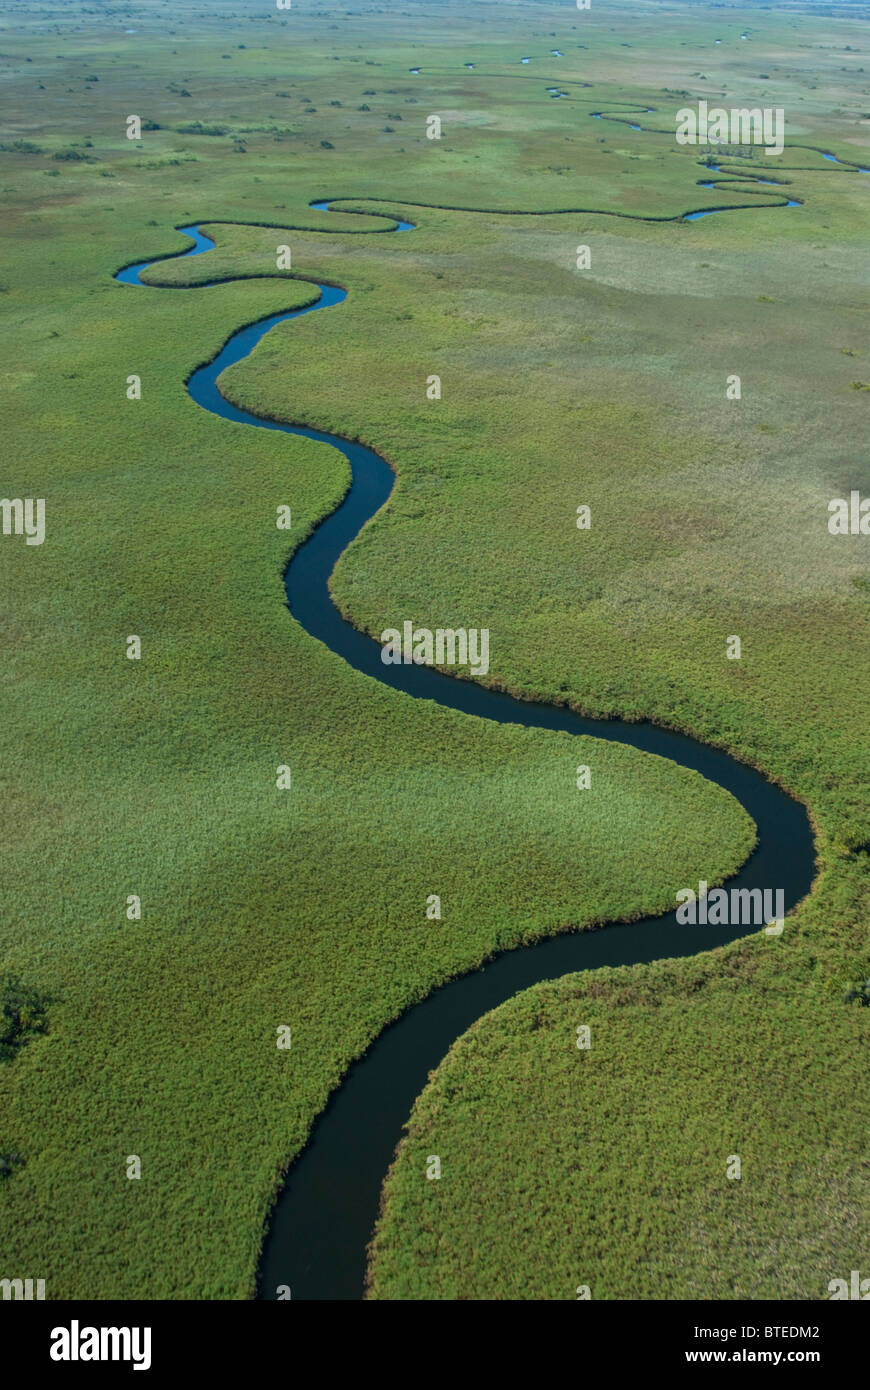 Aerial scenic view of meandering river fringed with Papyrus reedbeds Stock Photo